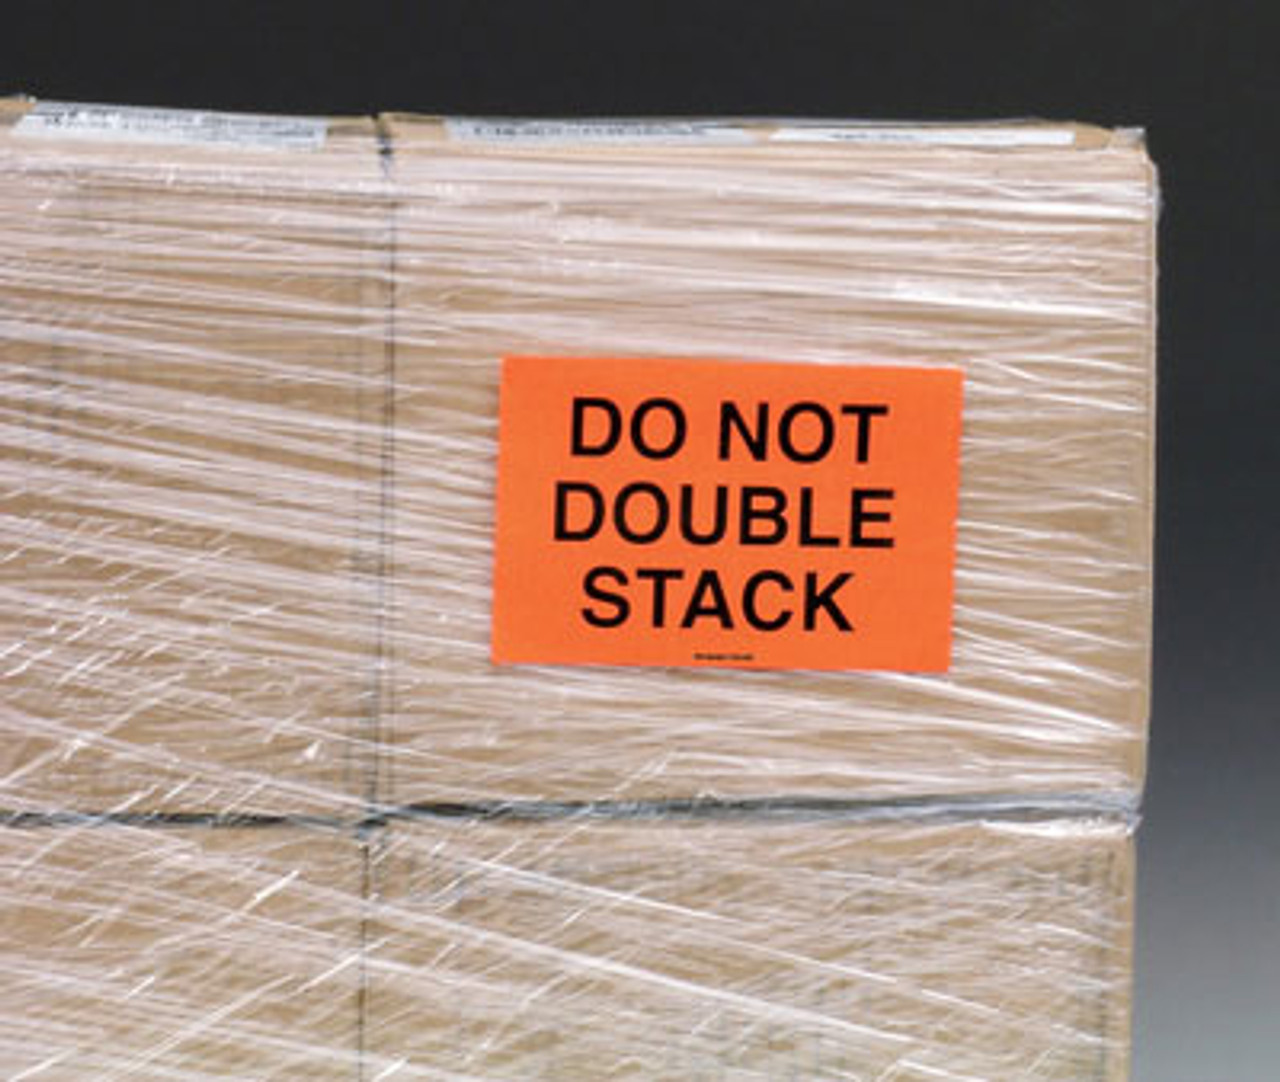 6" x 4" Fluorescent Shipping Label - "Do Not Double Stack" Message (Qty) 500 Items